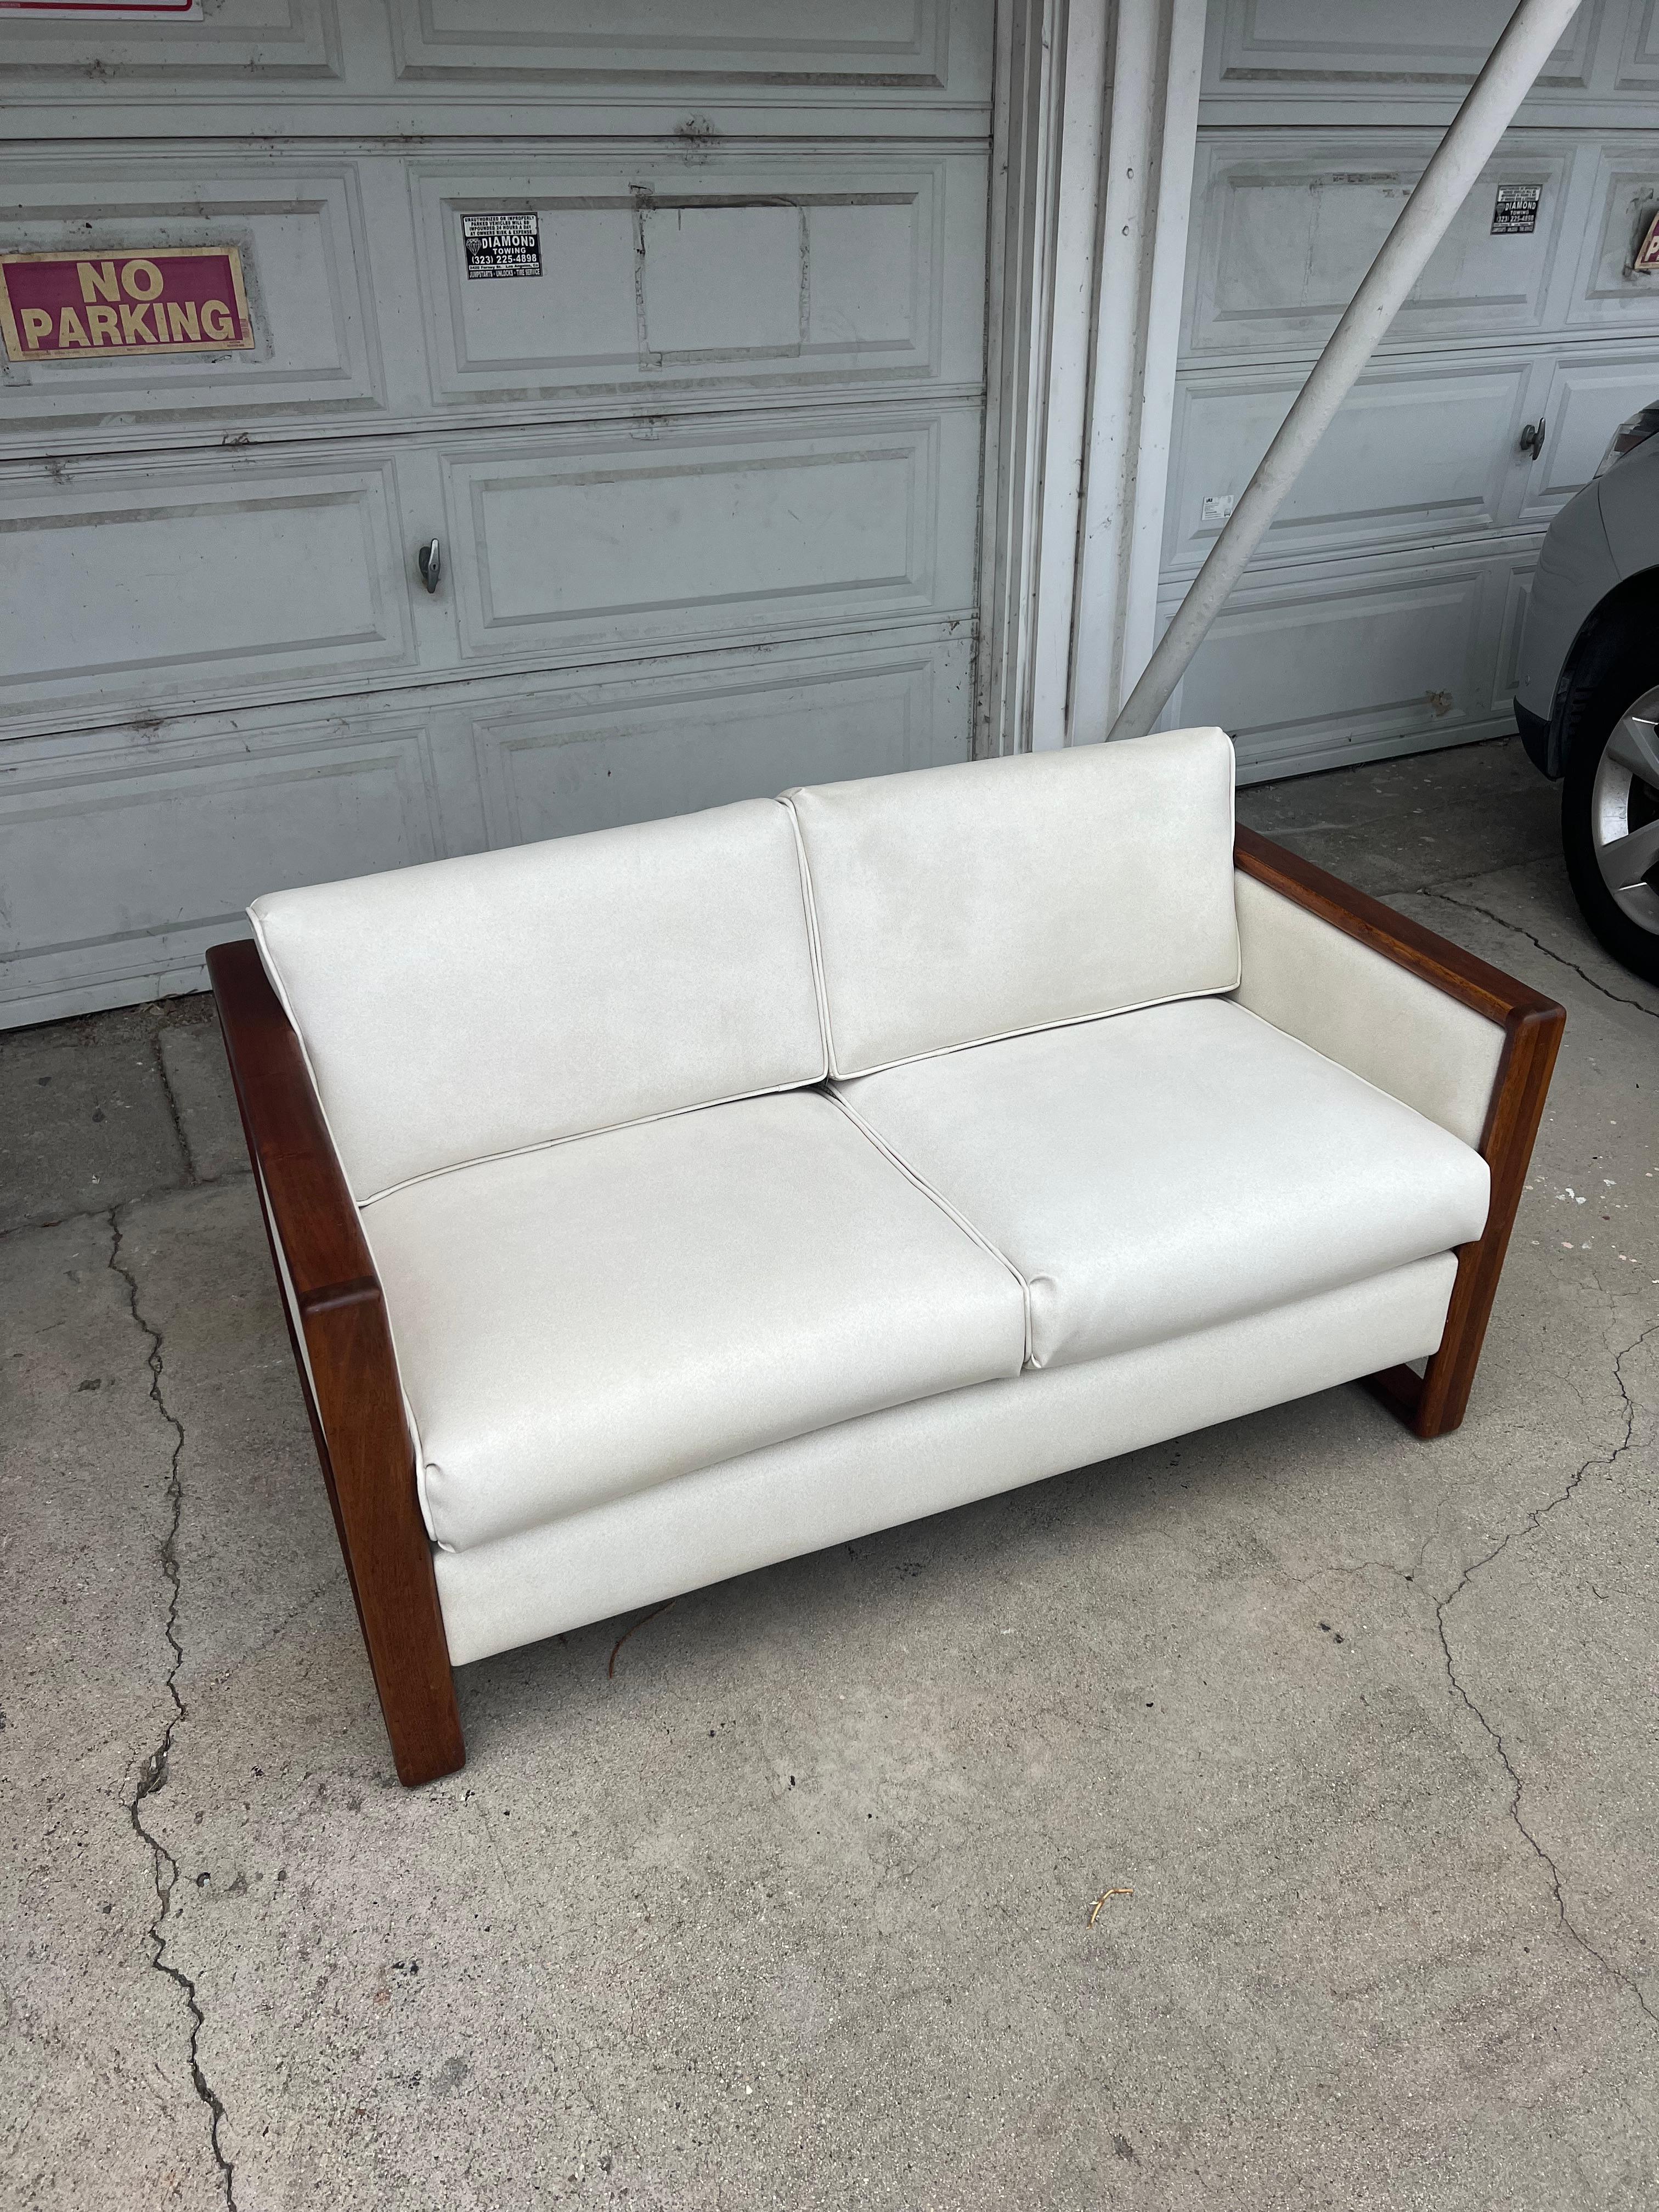 Super special vintage loveseat hailing from the 1970s with original upholstery in ivory speckled vinyl. Seat cushions attach to hook at crease between seat and back while seat back pillows rest atop to create a comfortable and attractive loveseat.